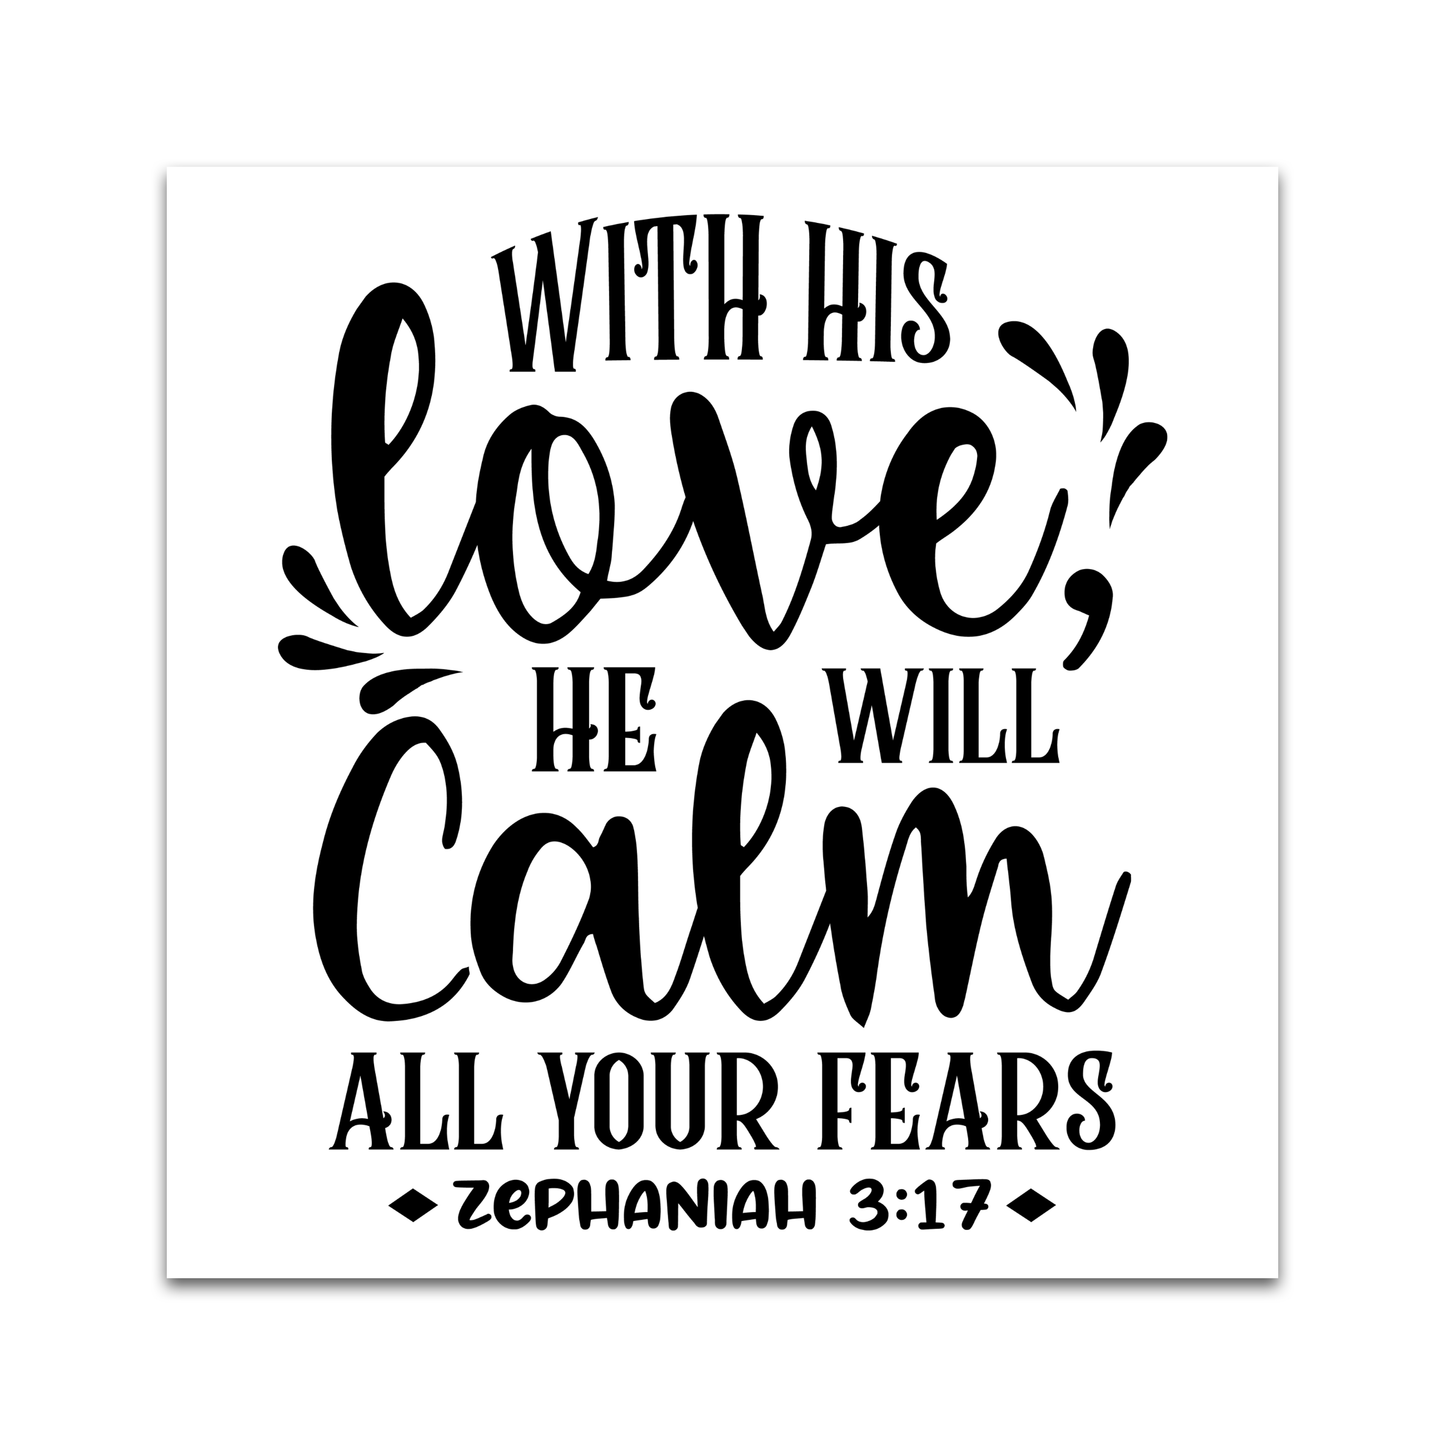 Precut Bible Quilt Square - With His Love, He Will Calm All Your Fears, Zephaniah 3:17